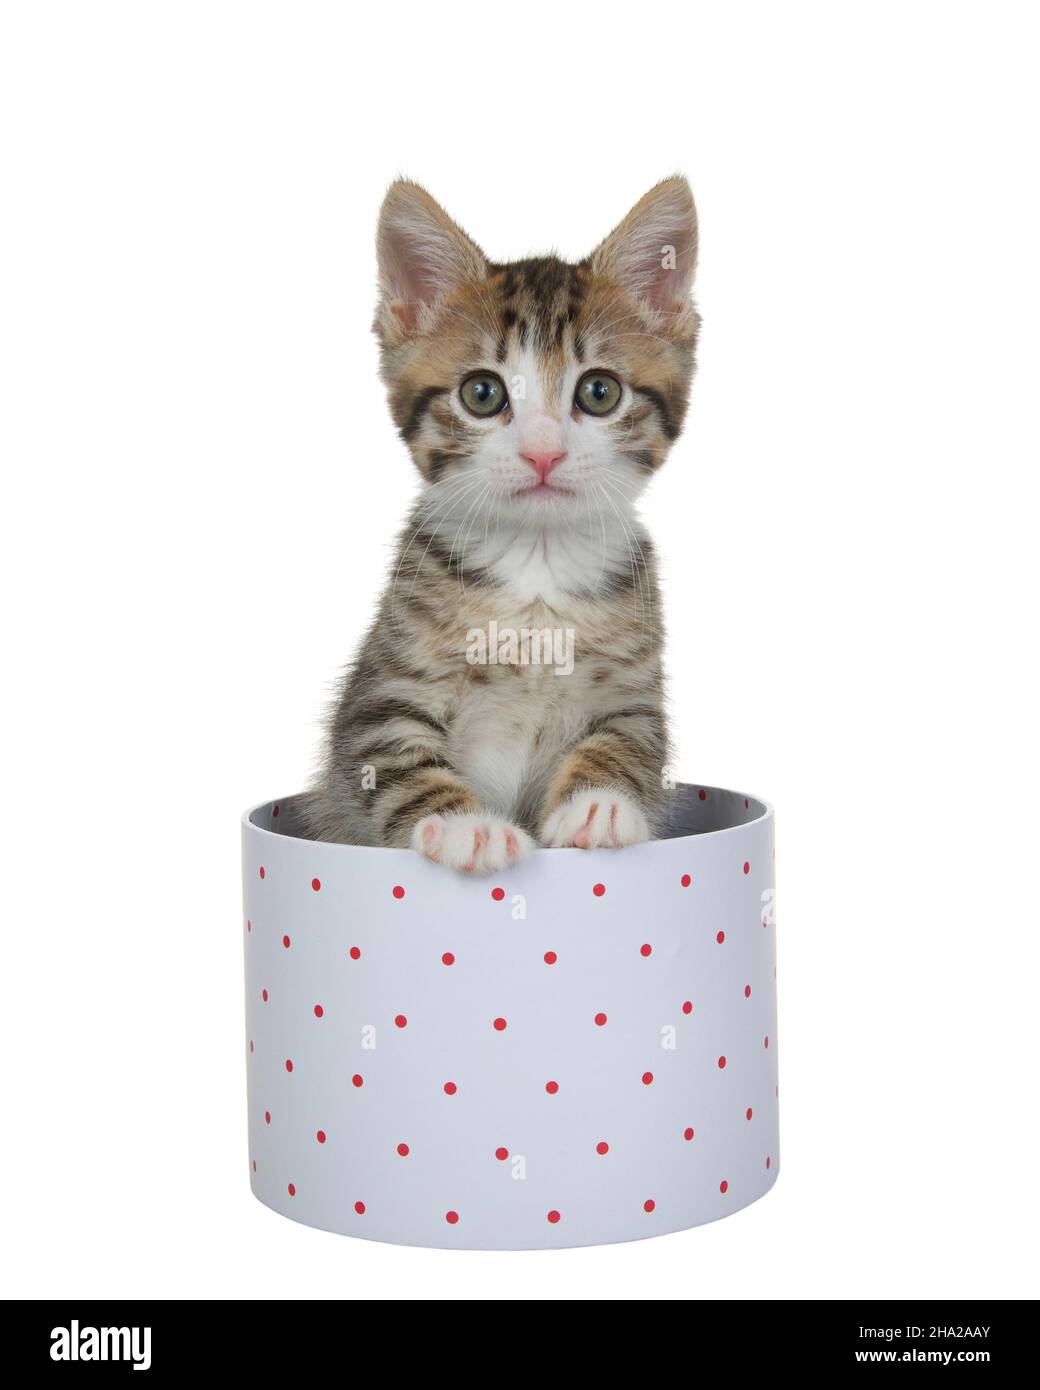 Close up of one grey tan and white kitten peeking out of a white box with red dots, isolated on white Stock Photo